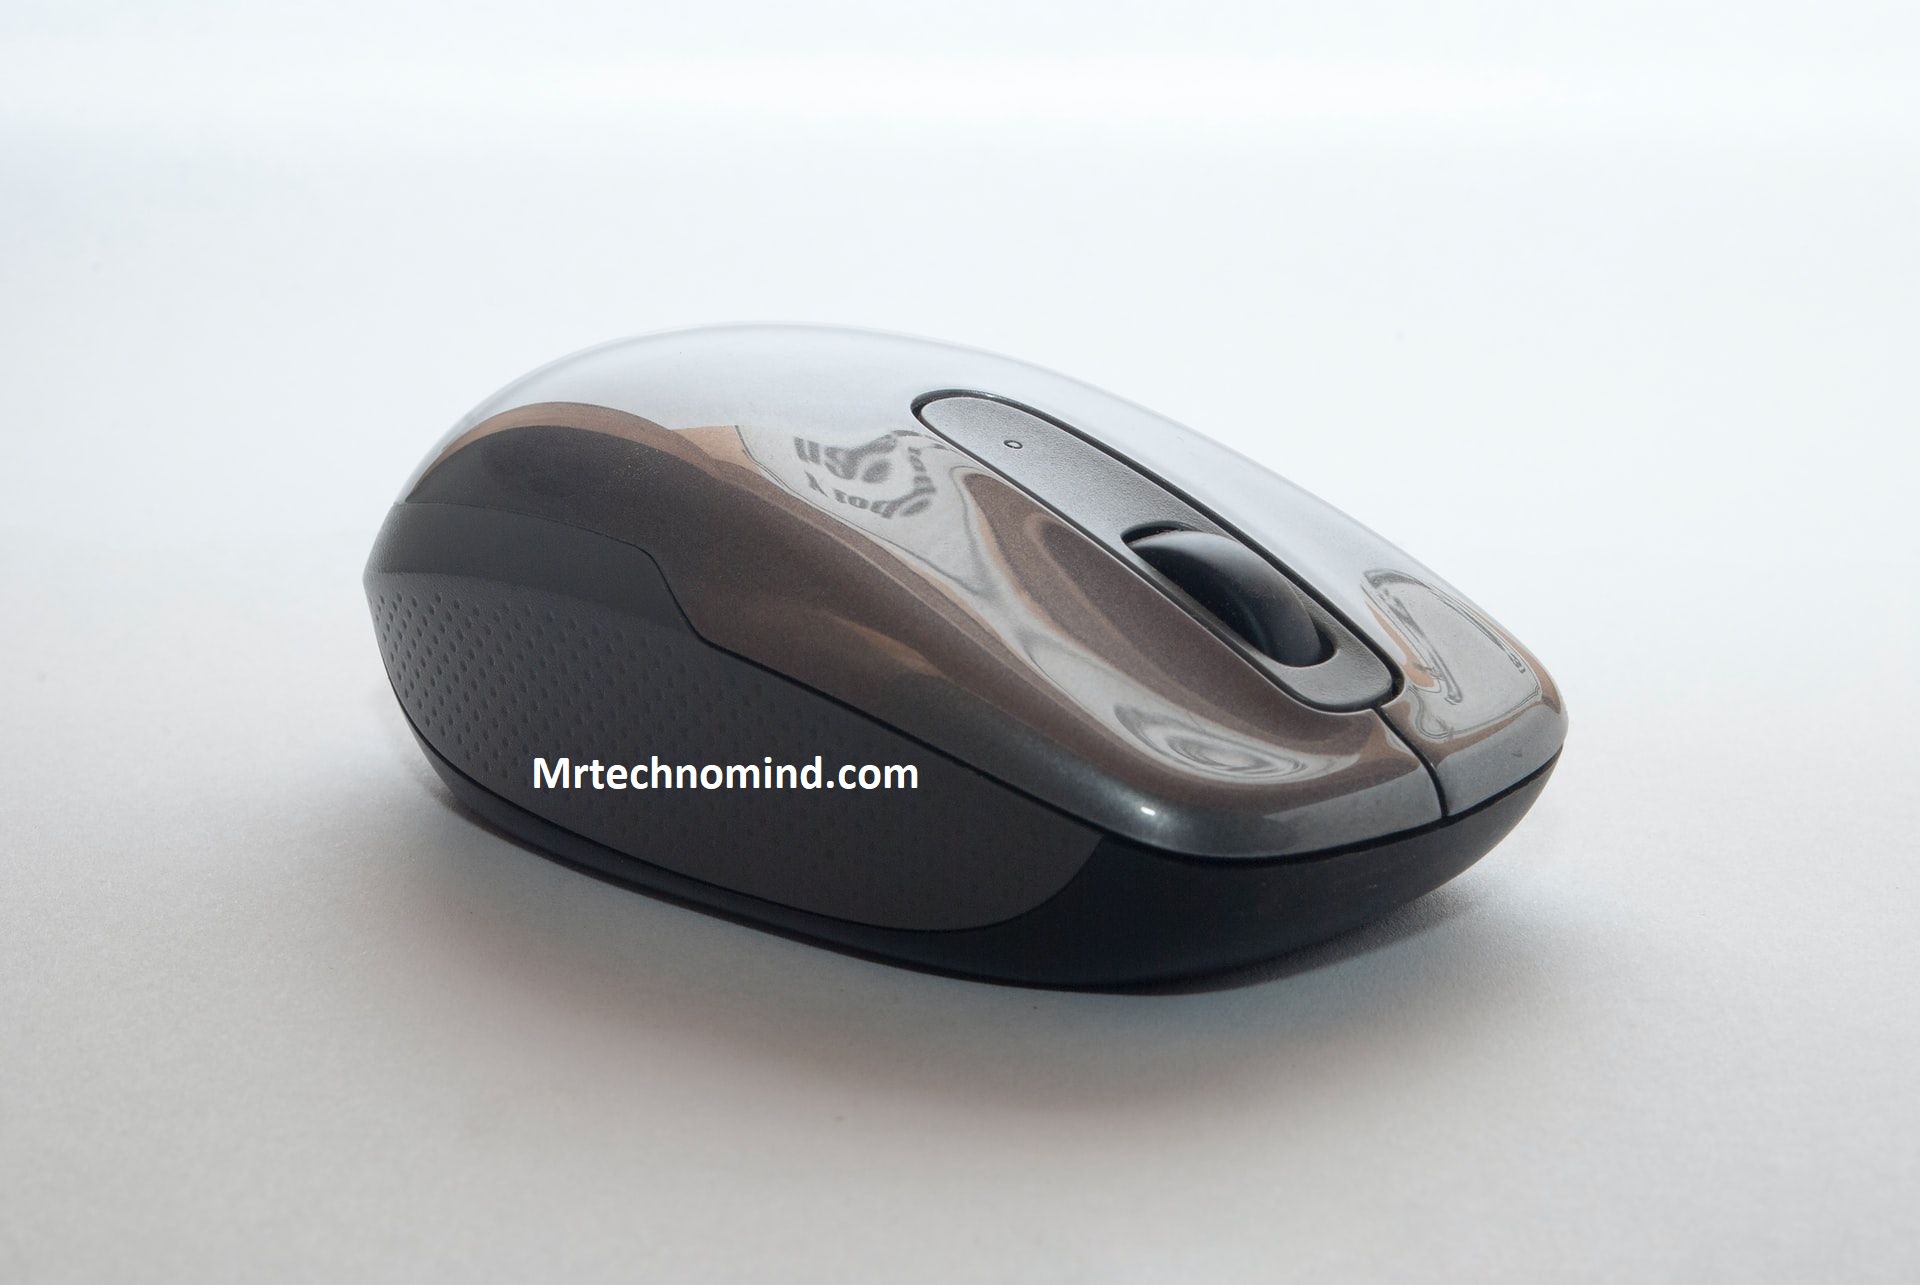 How do You Check or Change DPI on a Mouse